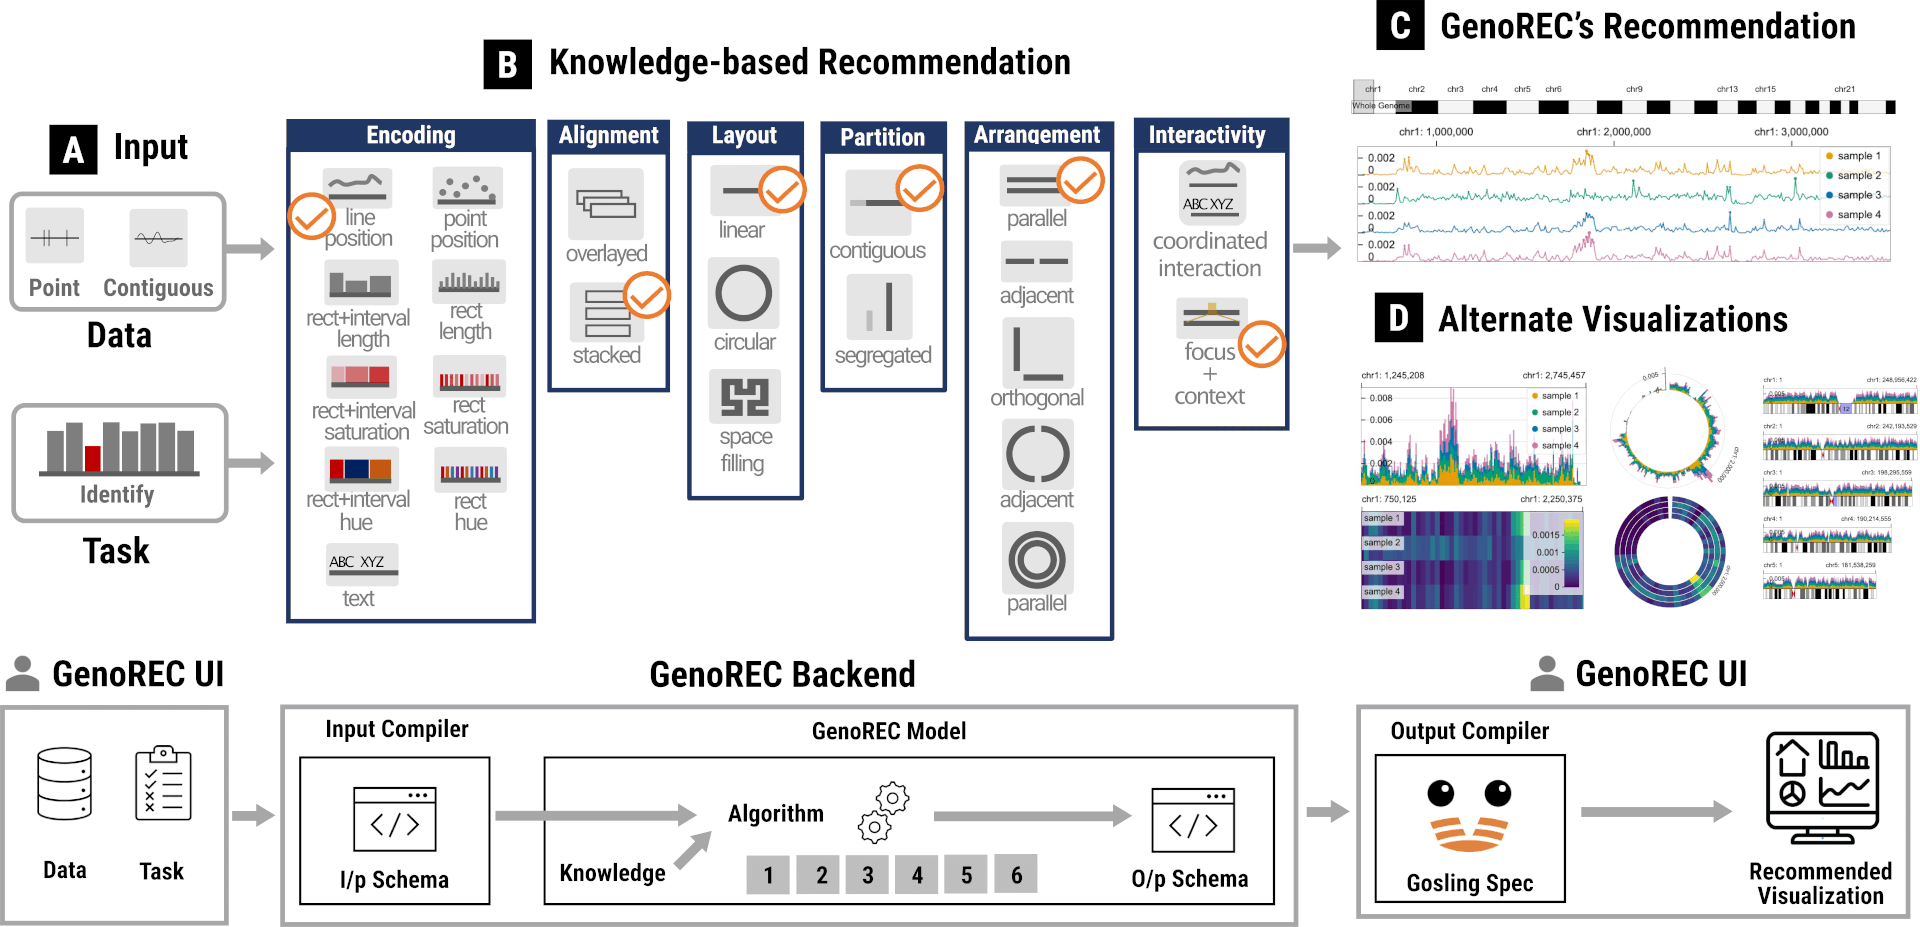 GenoREC's recommendation model and system design overview.